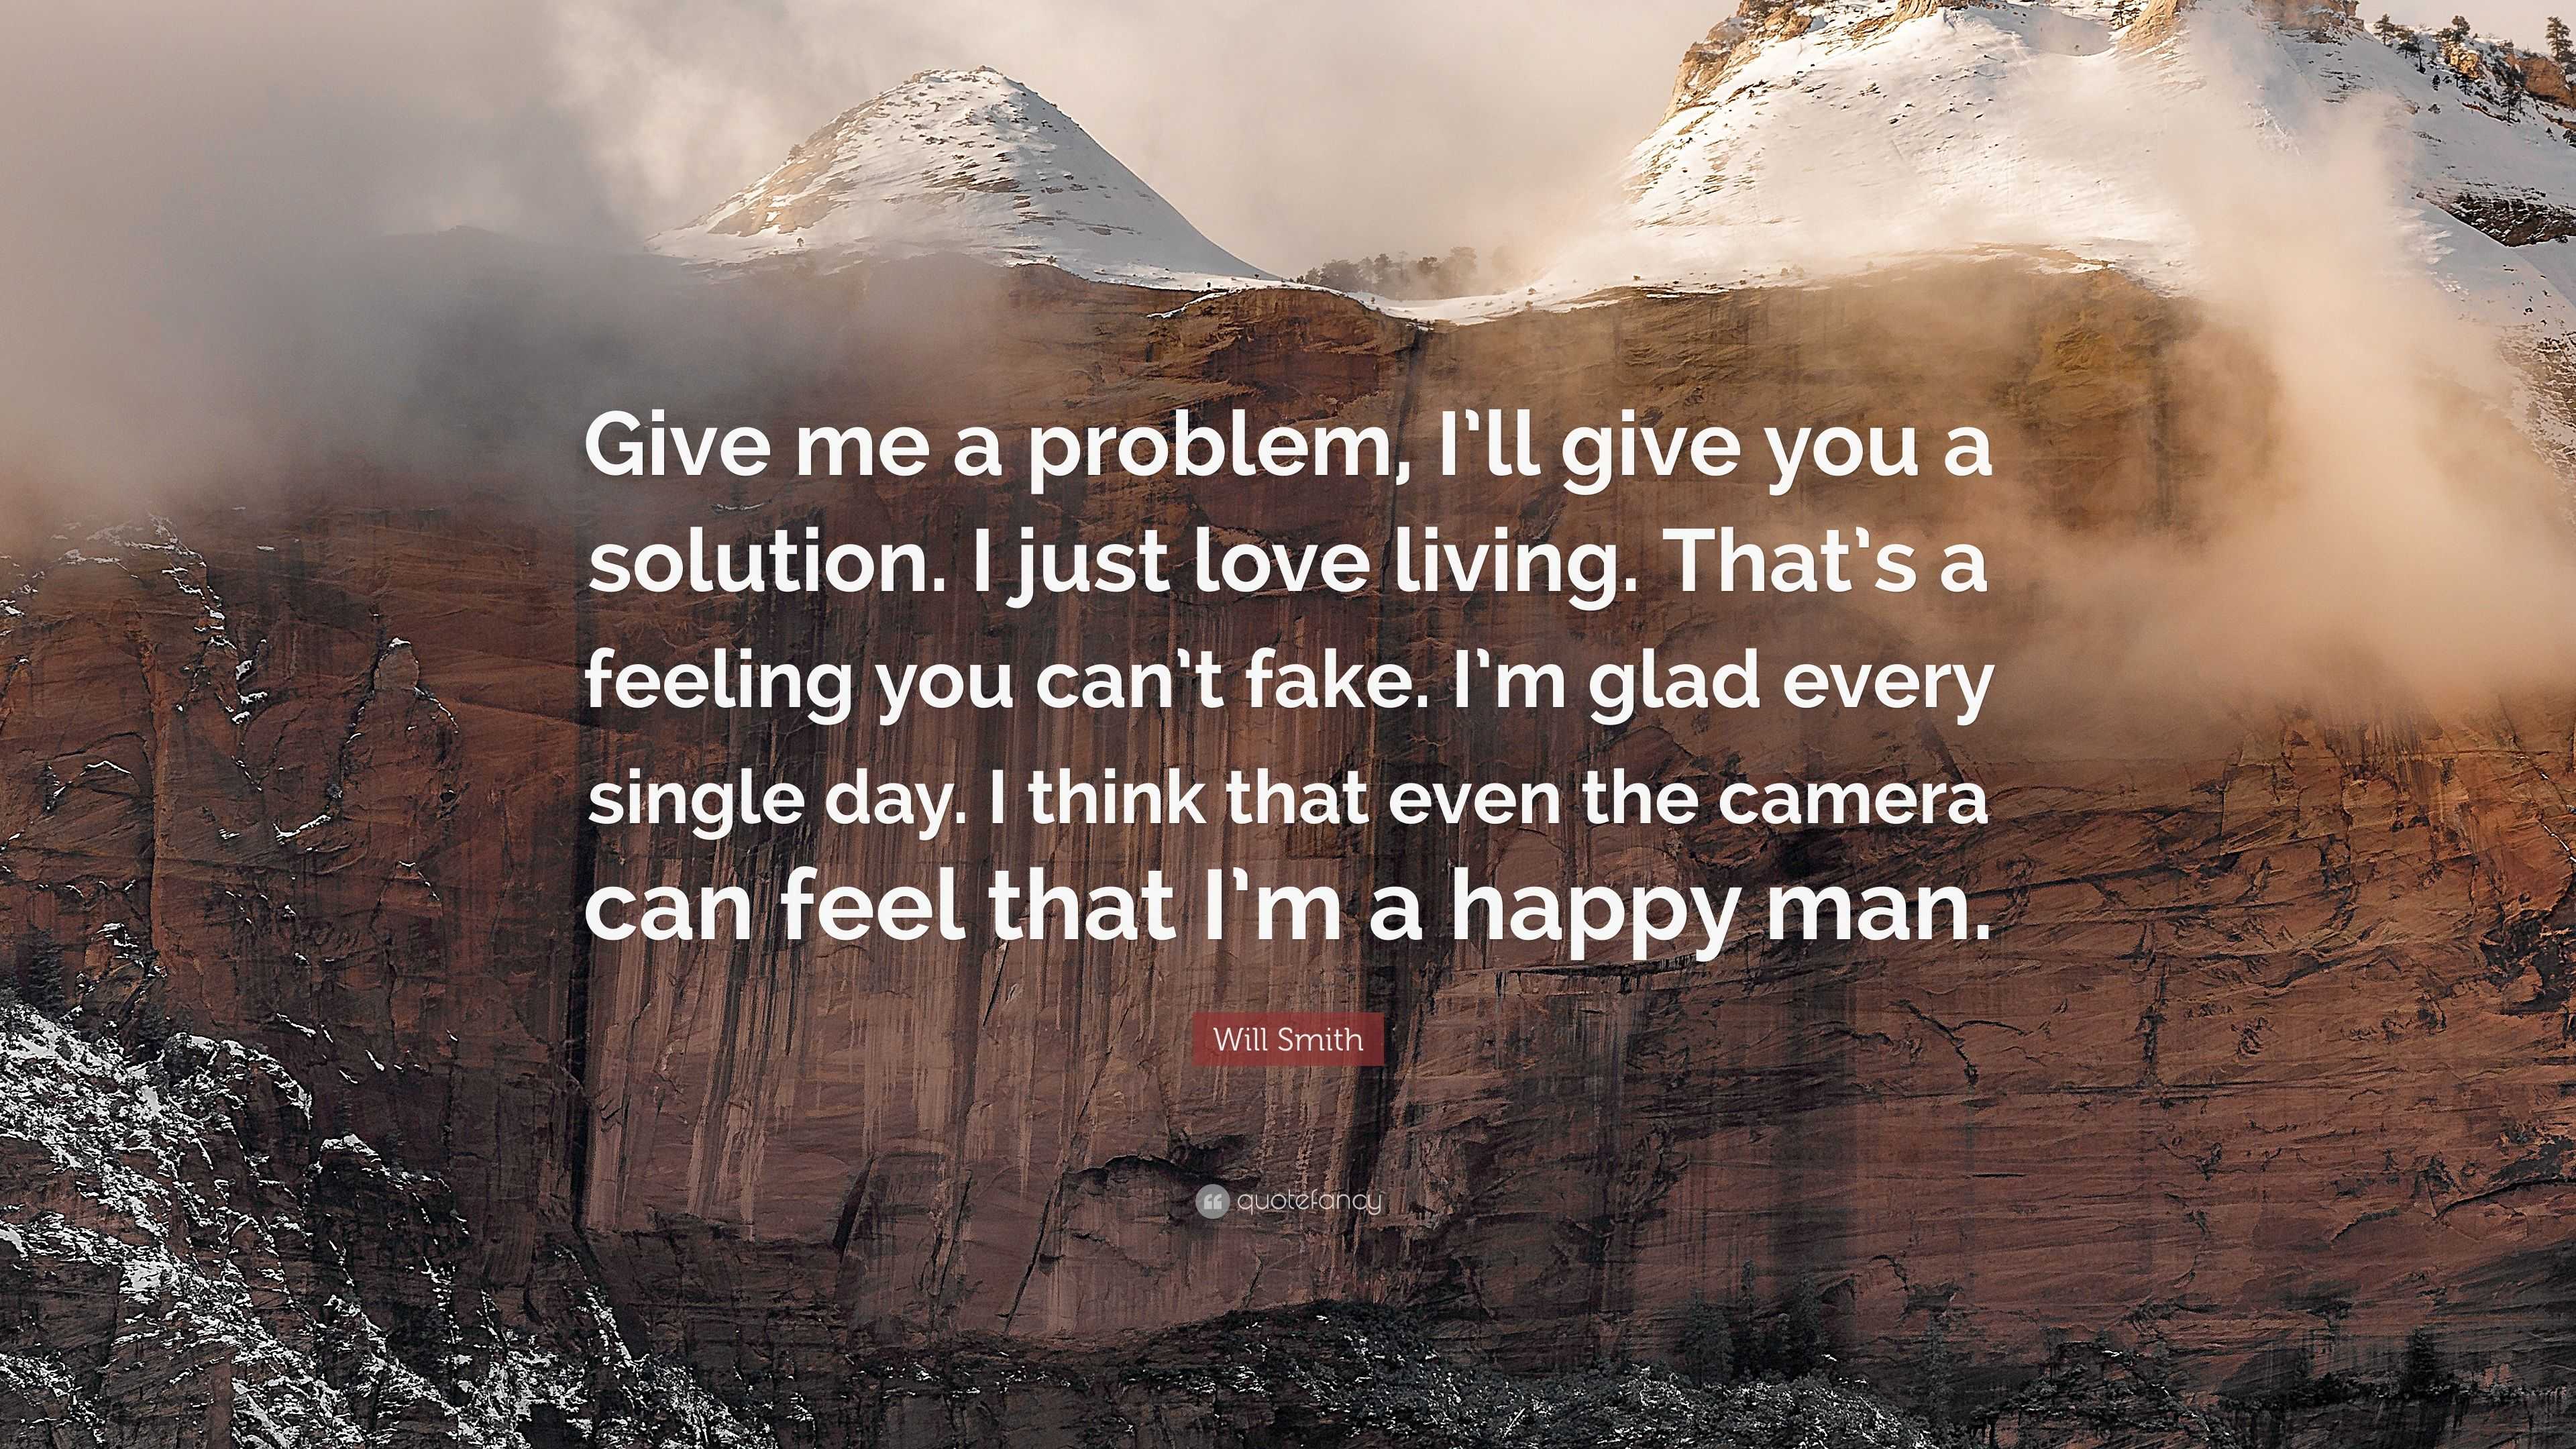 Will Smith Quote “Give me a problem I ll give you a